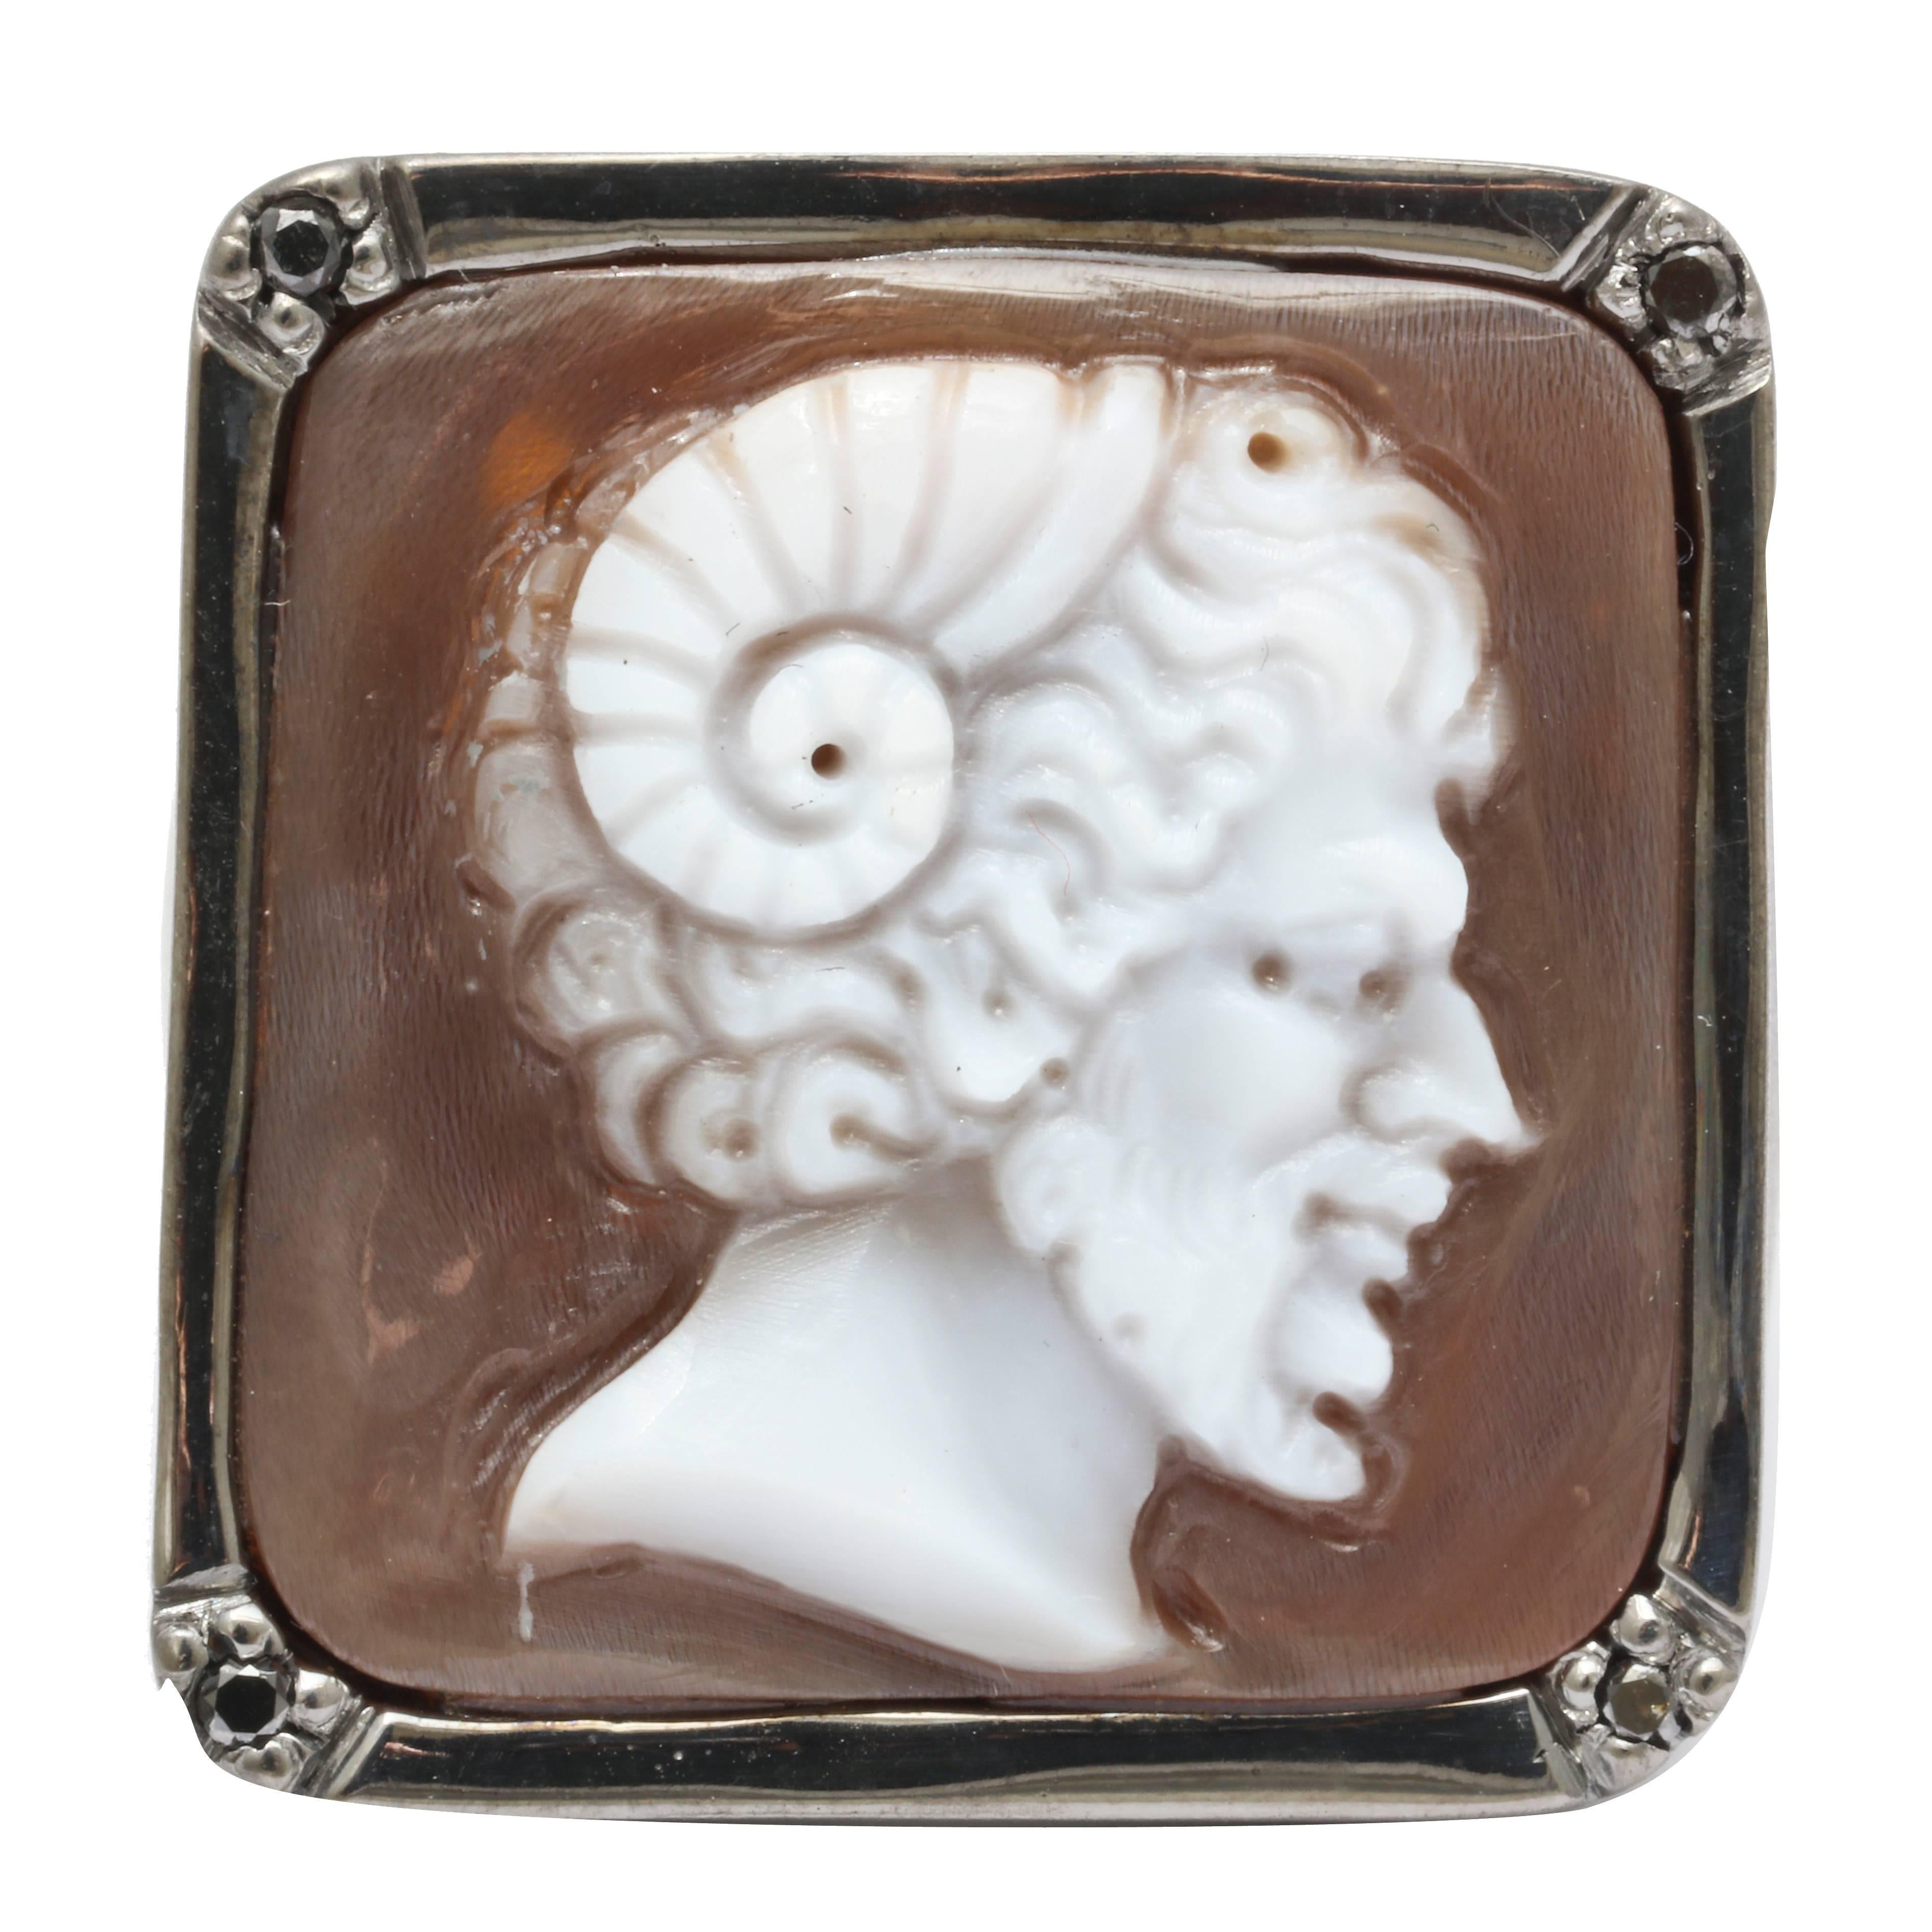 20mm sardonyx shell cameo hand-carved, set in sterling silver black rhodium plated ring with black diamonds.
Ring Size: US10

*Being these are hand crafted one of a kind designs, not all ring sizes might be immediately available. We offer custom